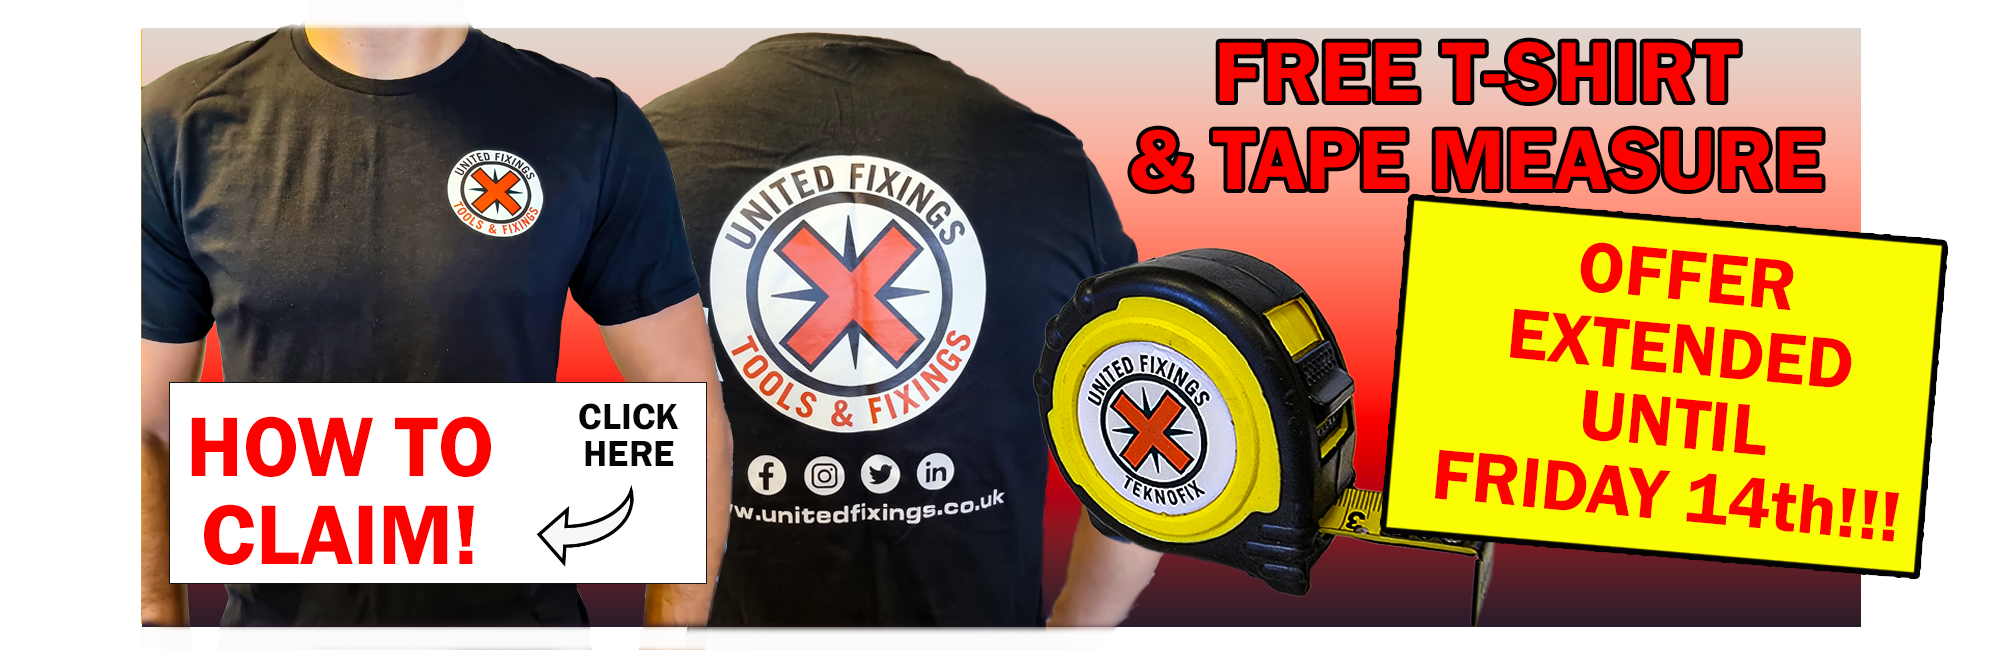 How to claim your free T-shirt & Tape Measure! *OFFER EXTENDED*